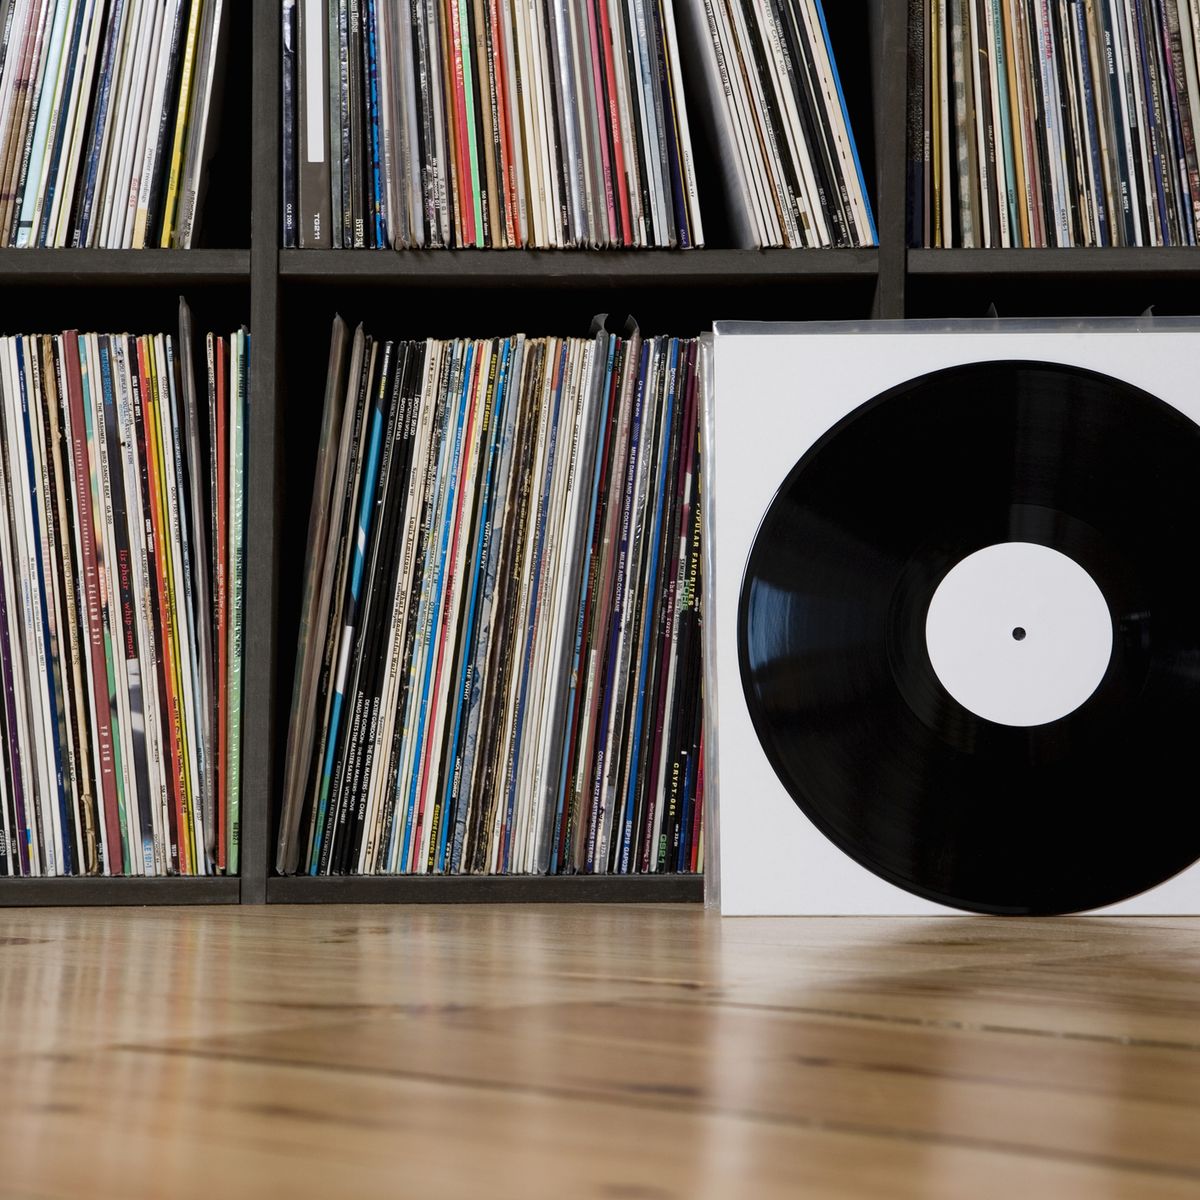 10 Vinyls (records/albums) that are worth a fortune today